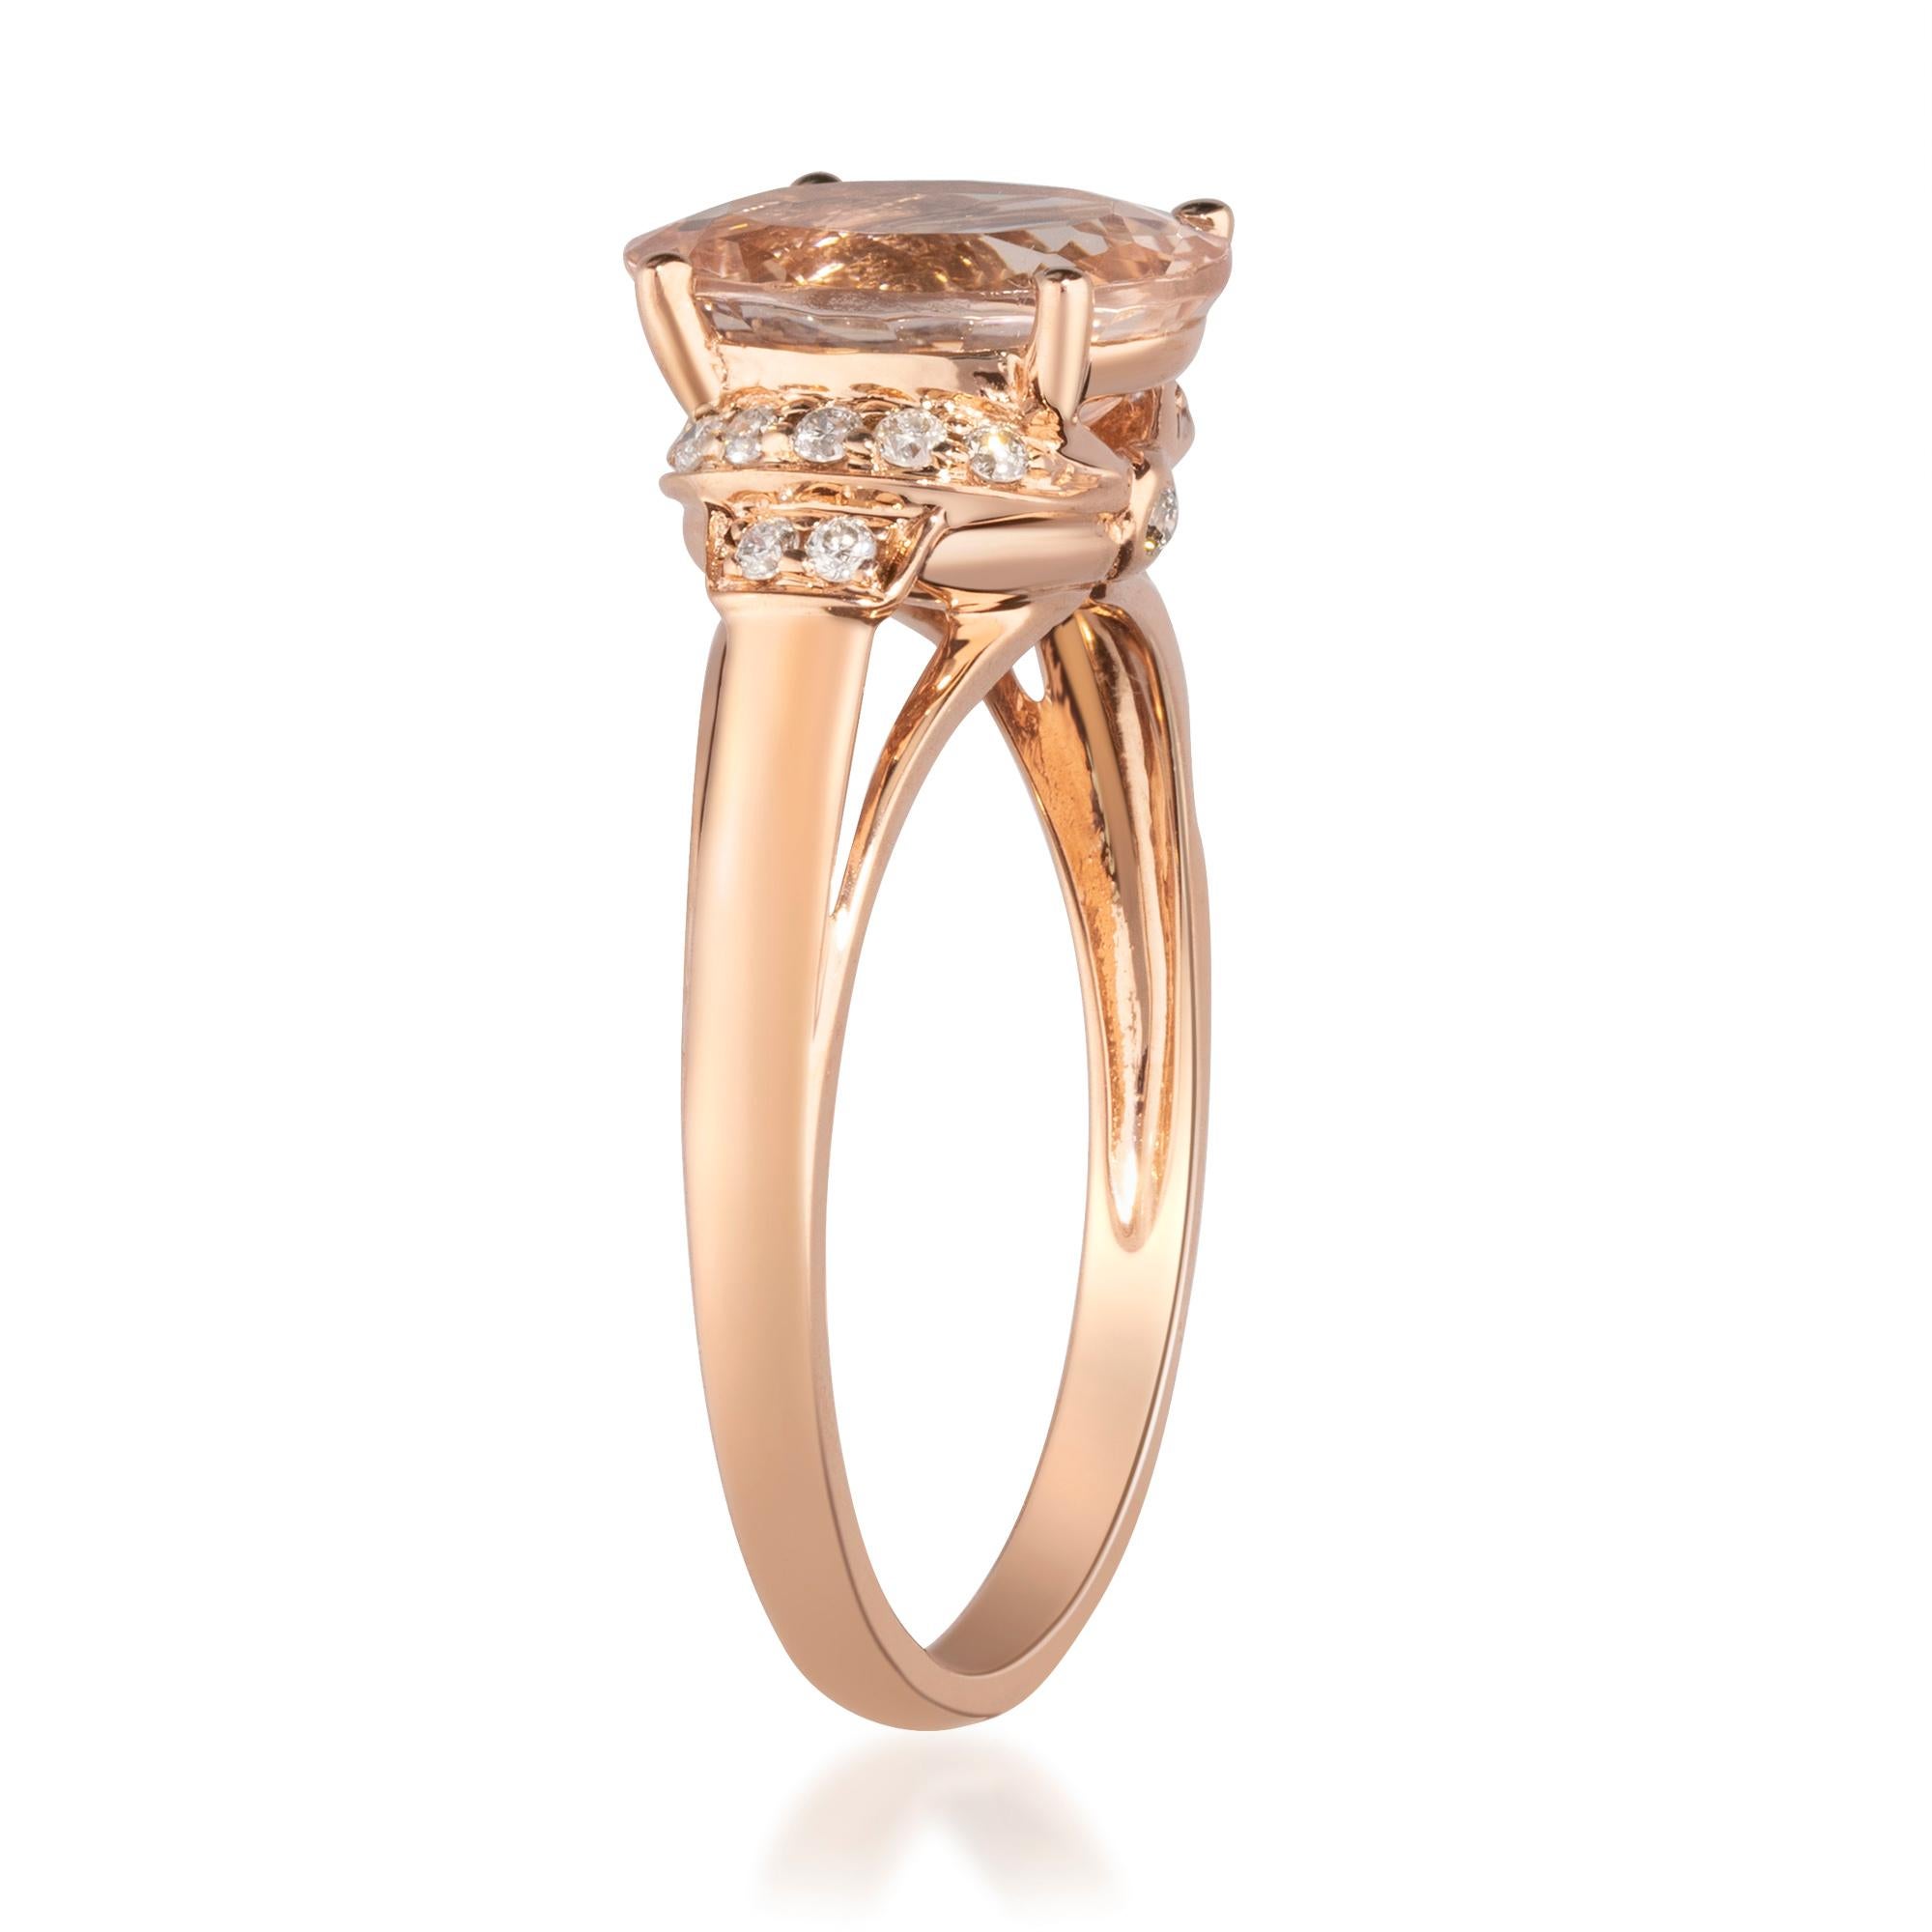 Tickle her pink with this oval-cut Genuine morganite and Gin& Grace Natural diamond ring. Offering a band crafted from 10k rose gold with a high-polish finish, the ring displays an impressive oval-cut Genuine morganite surrounded by 16 round-cut